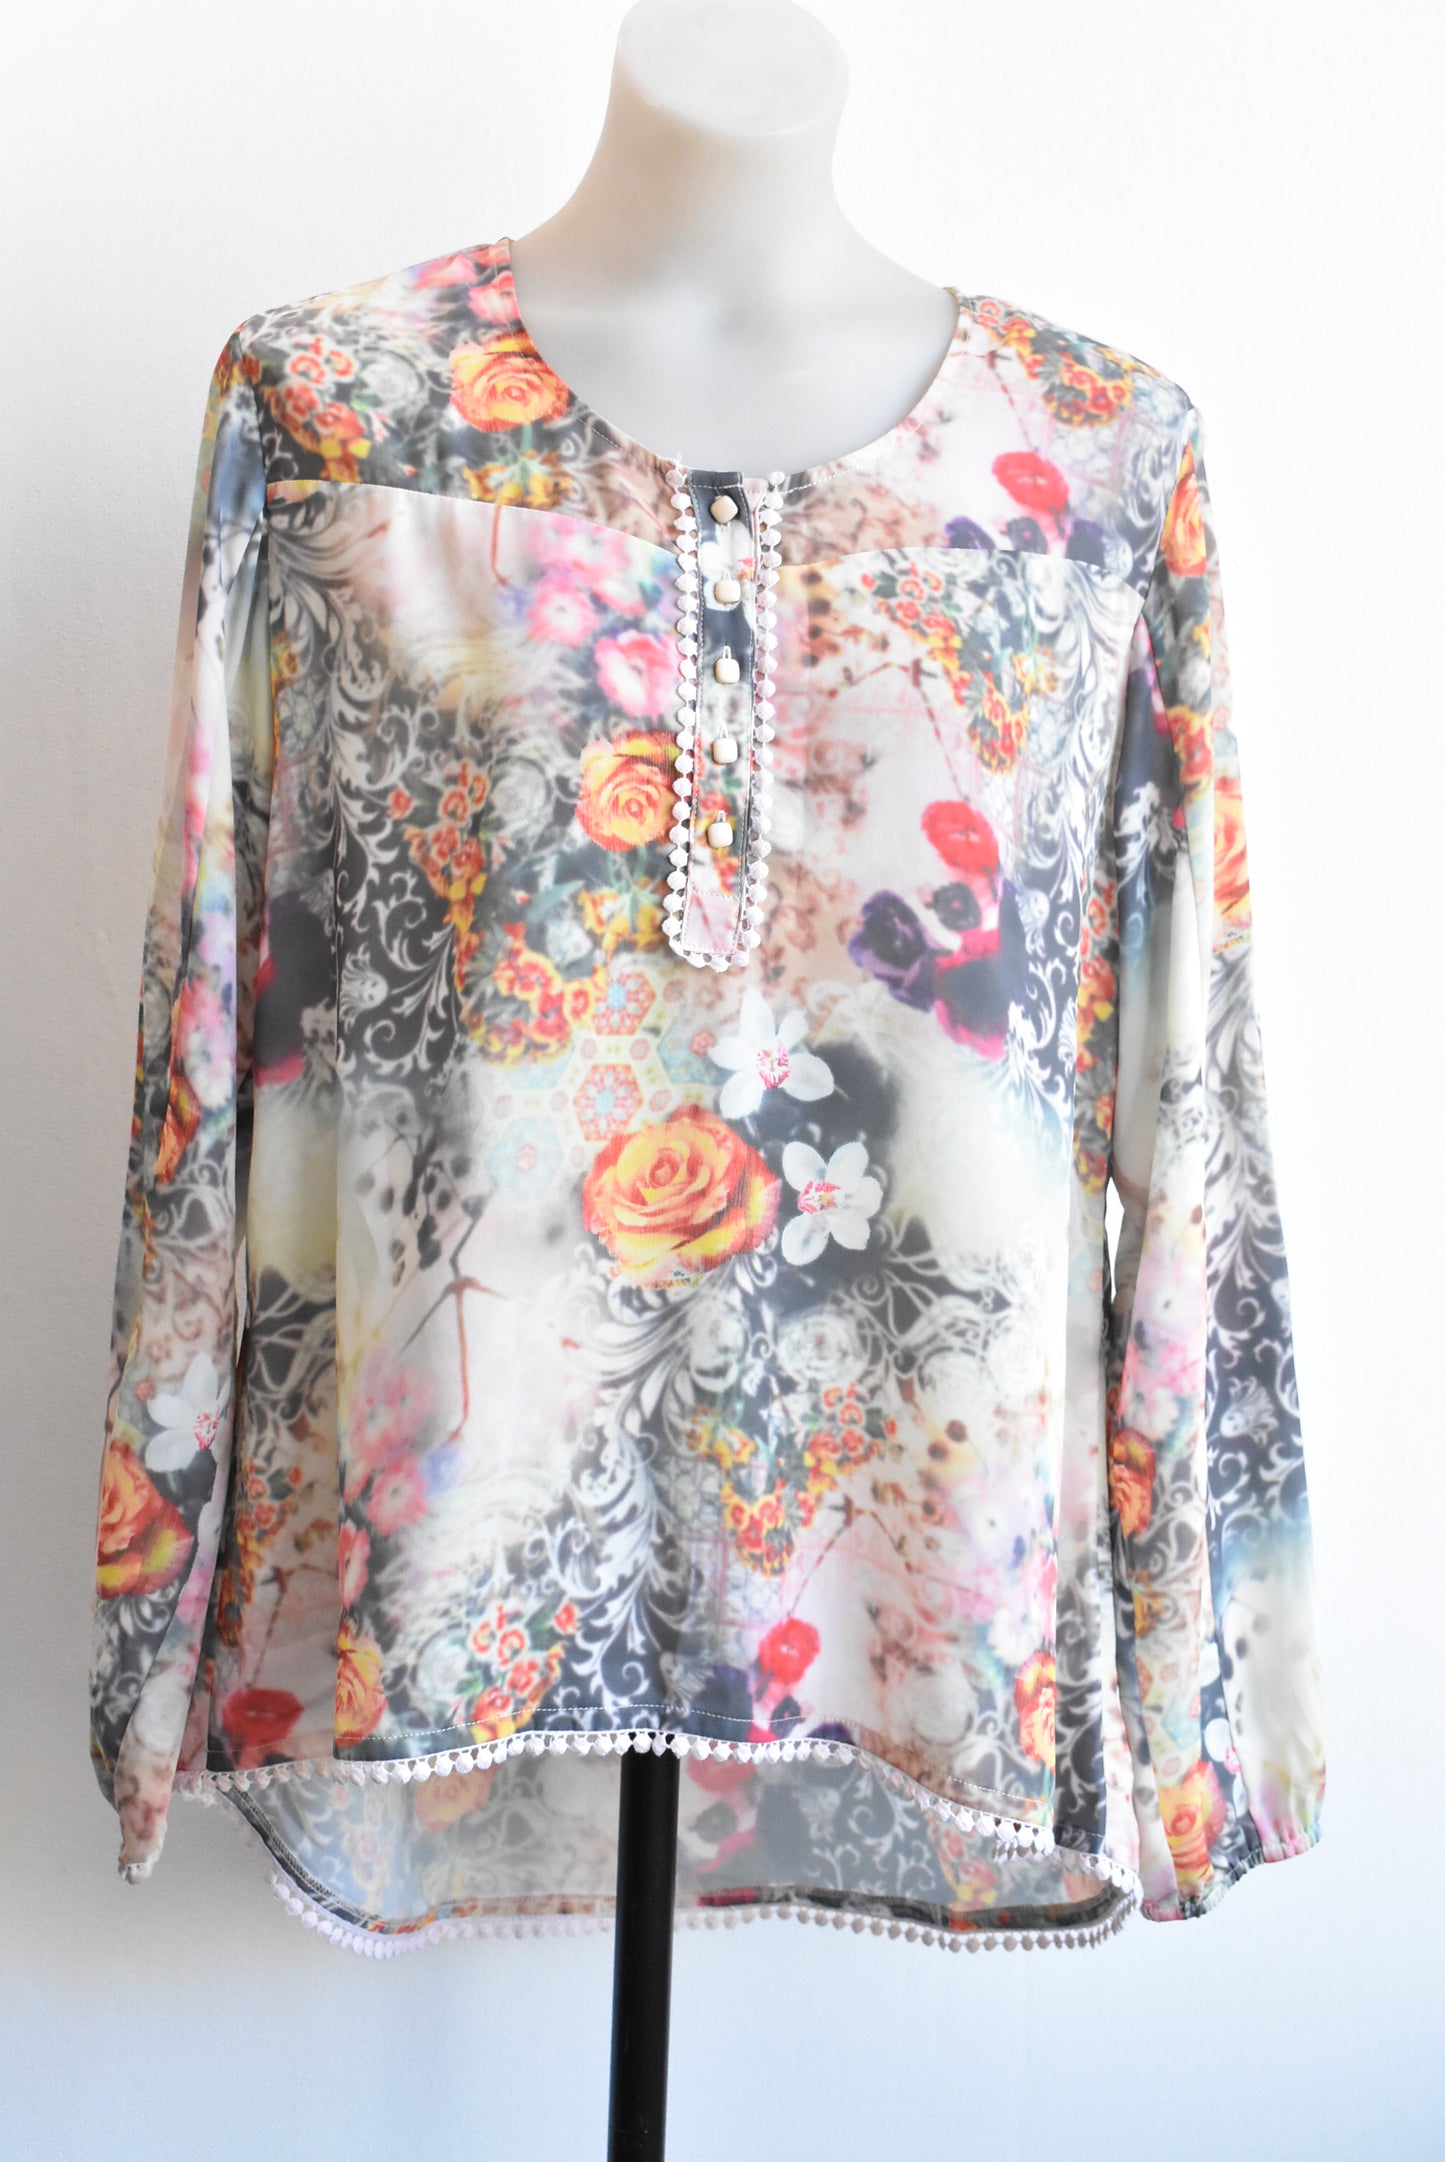 Scope floral top, size 14